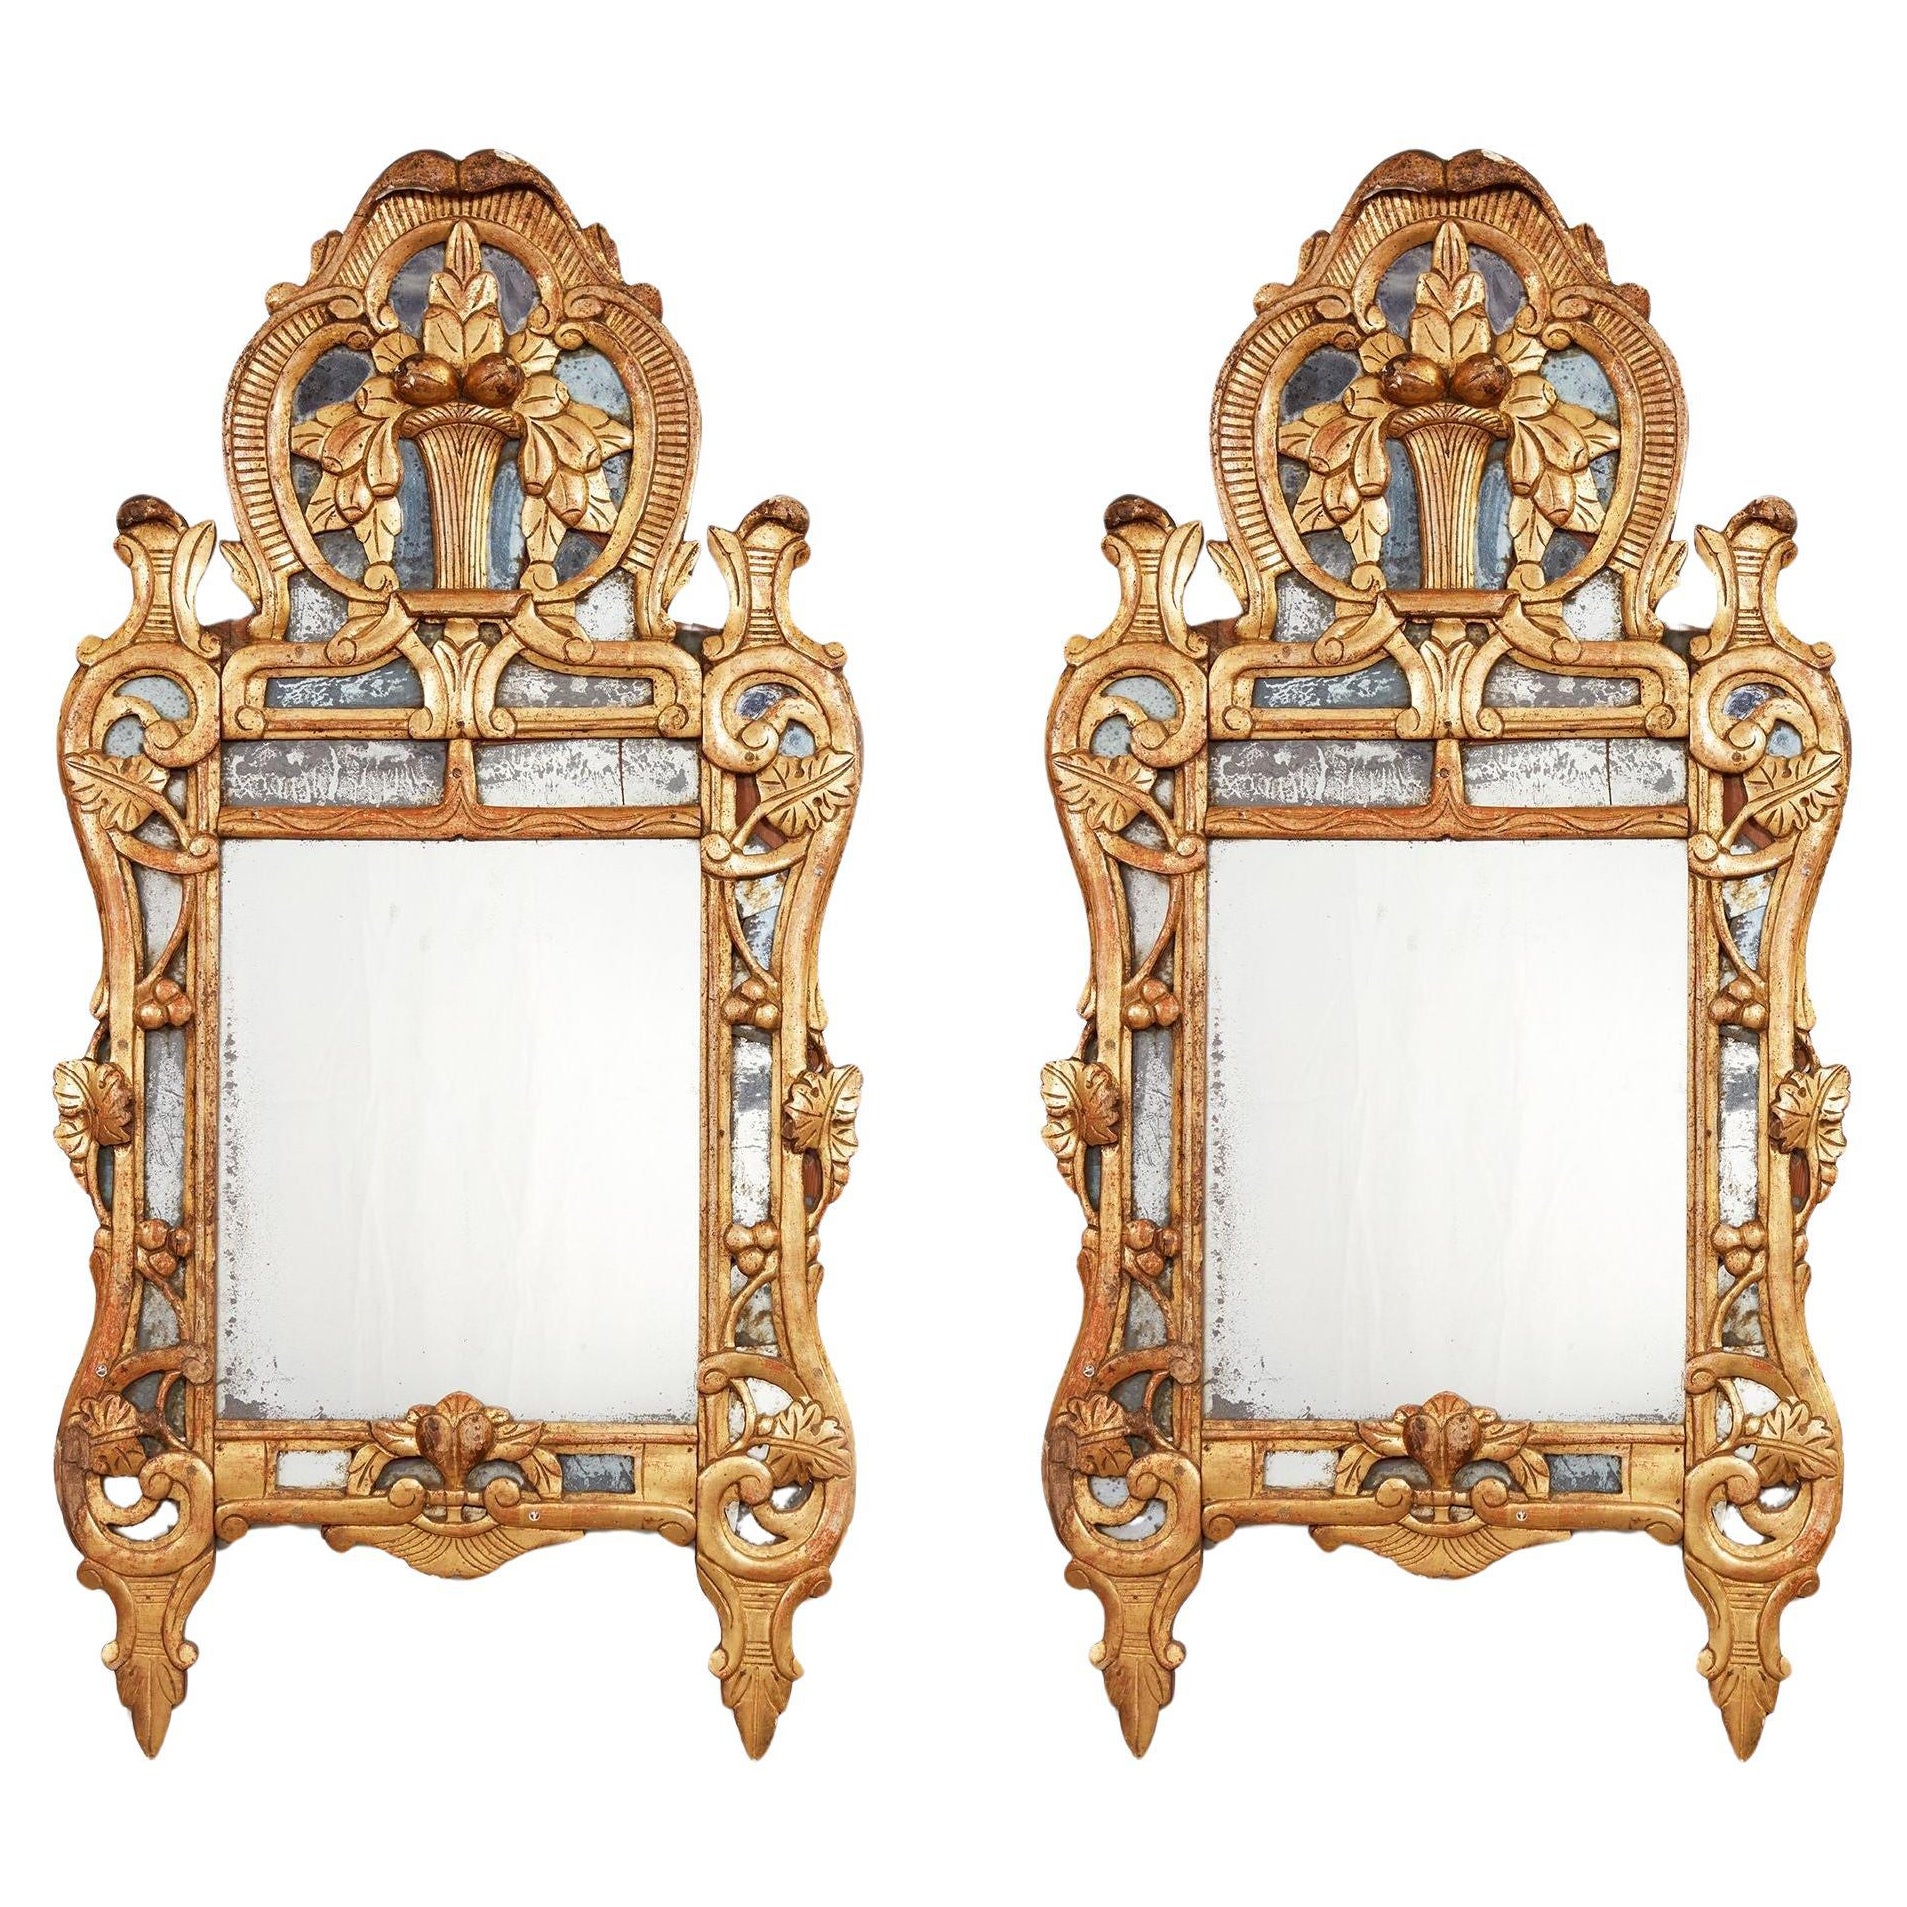 A Pair of 18th c. French Mirrors For Sale